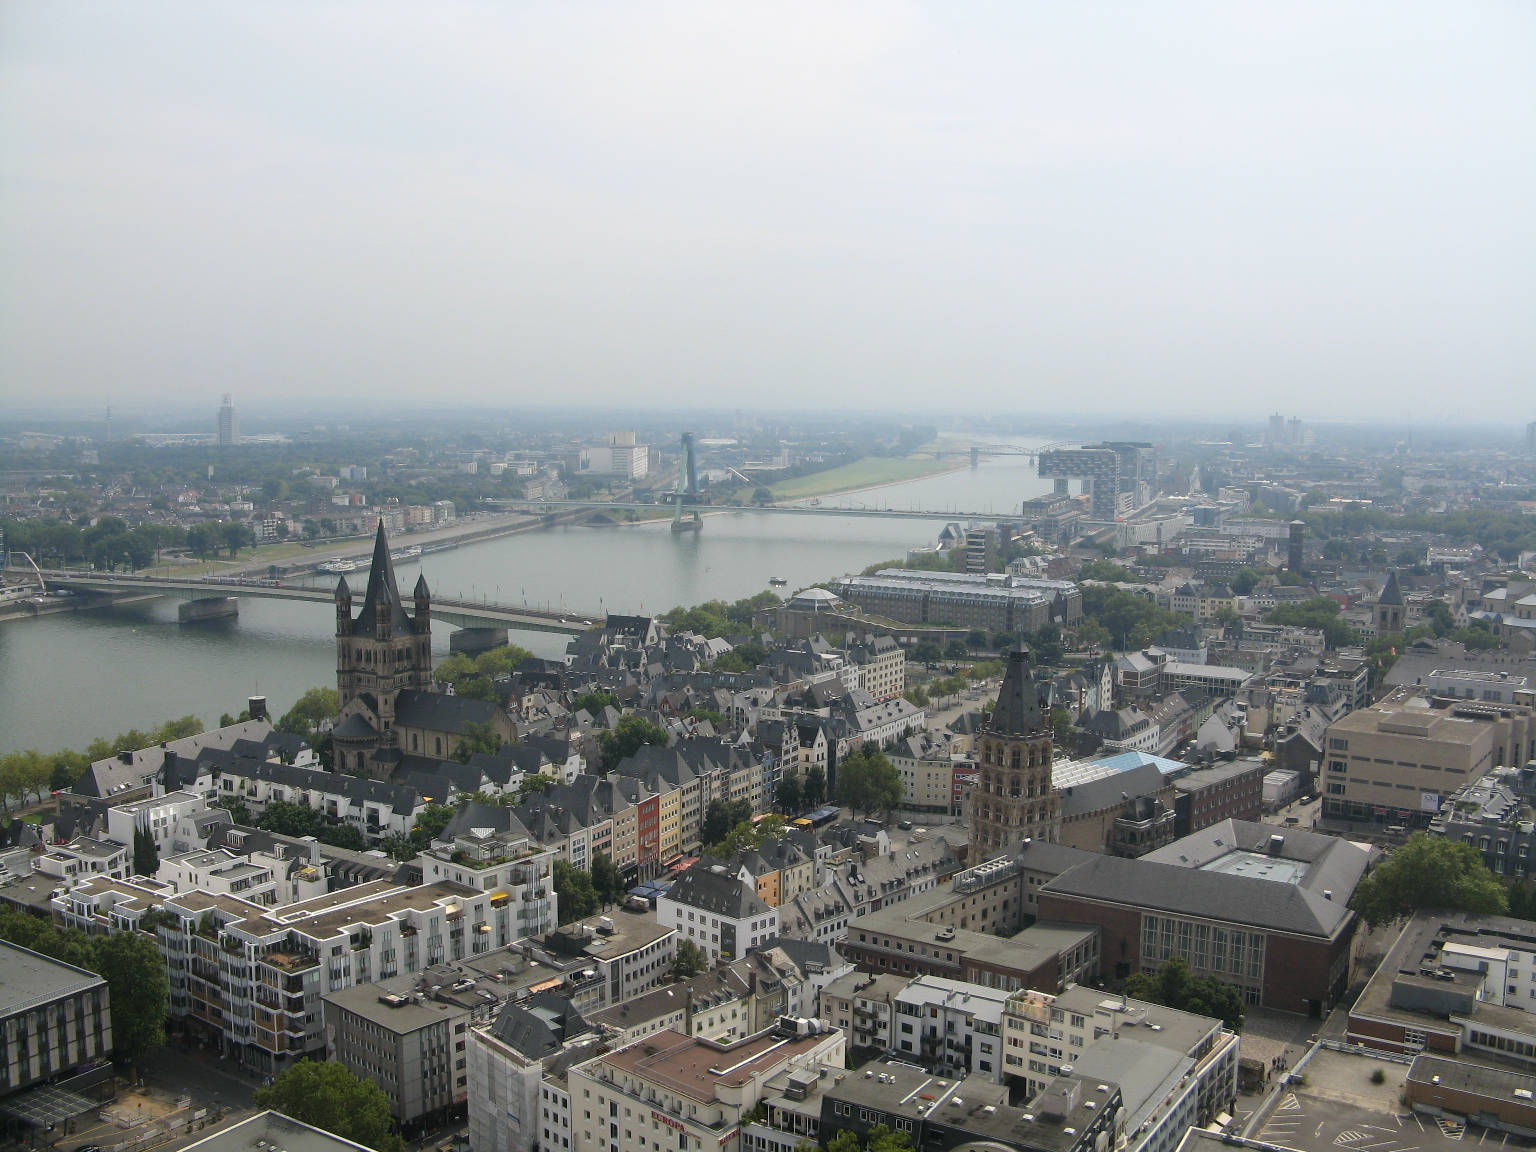 Wider view of the Rhine